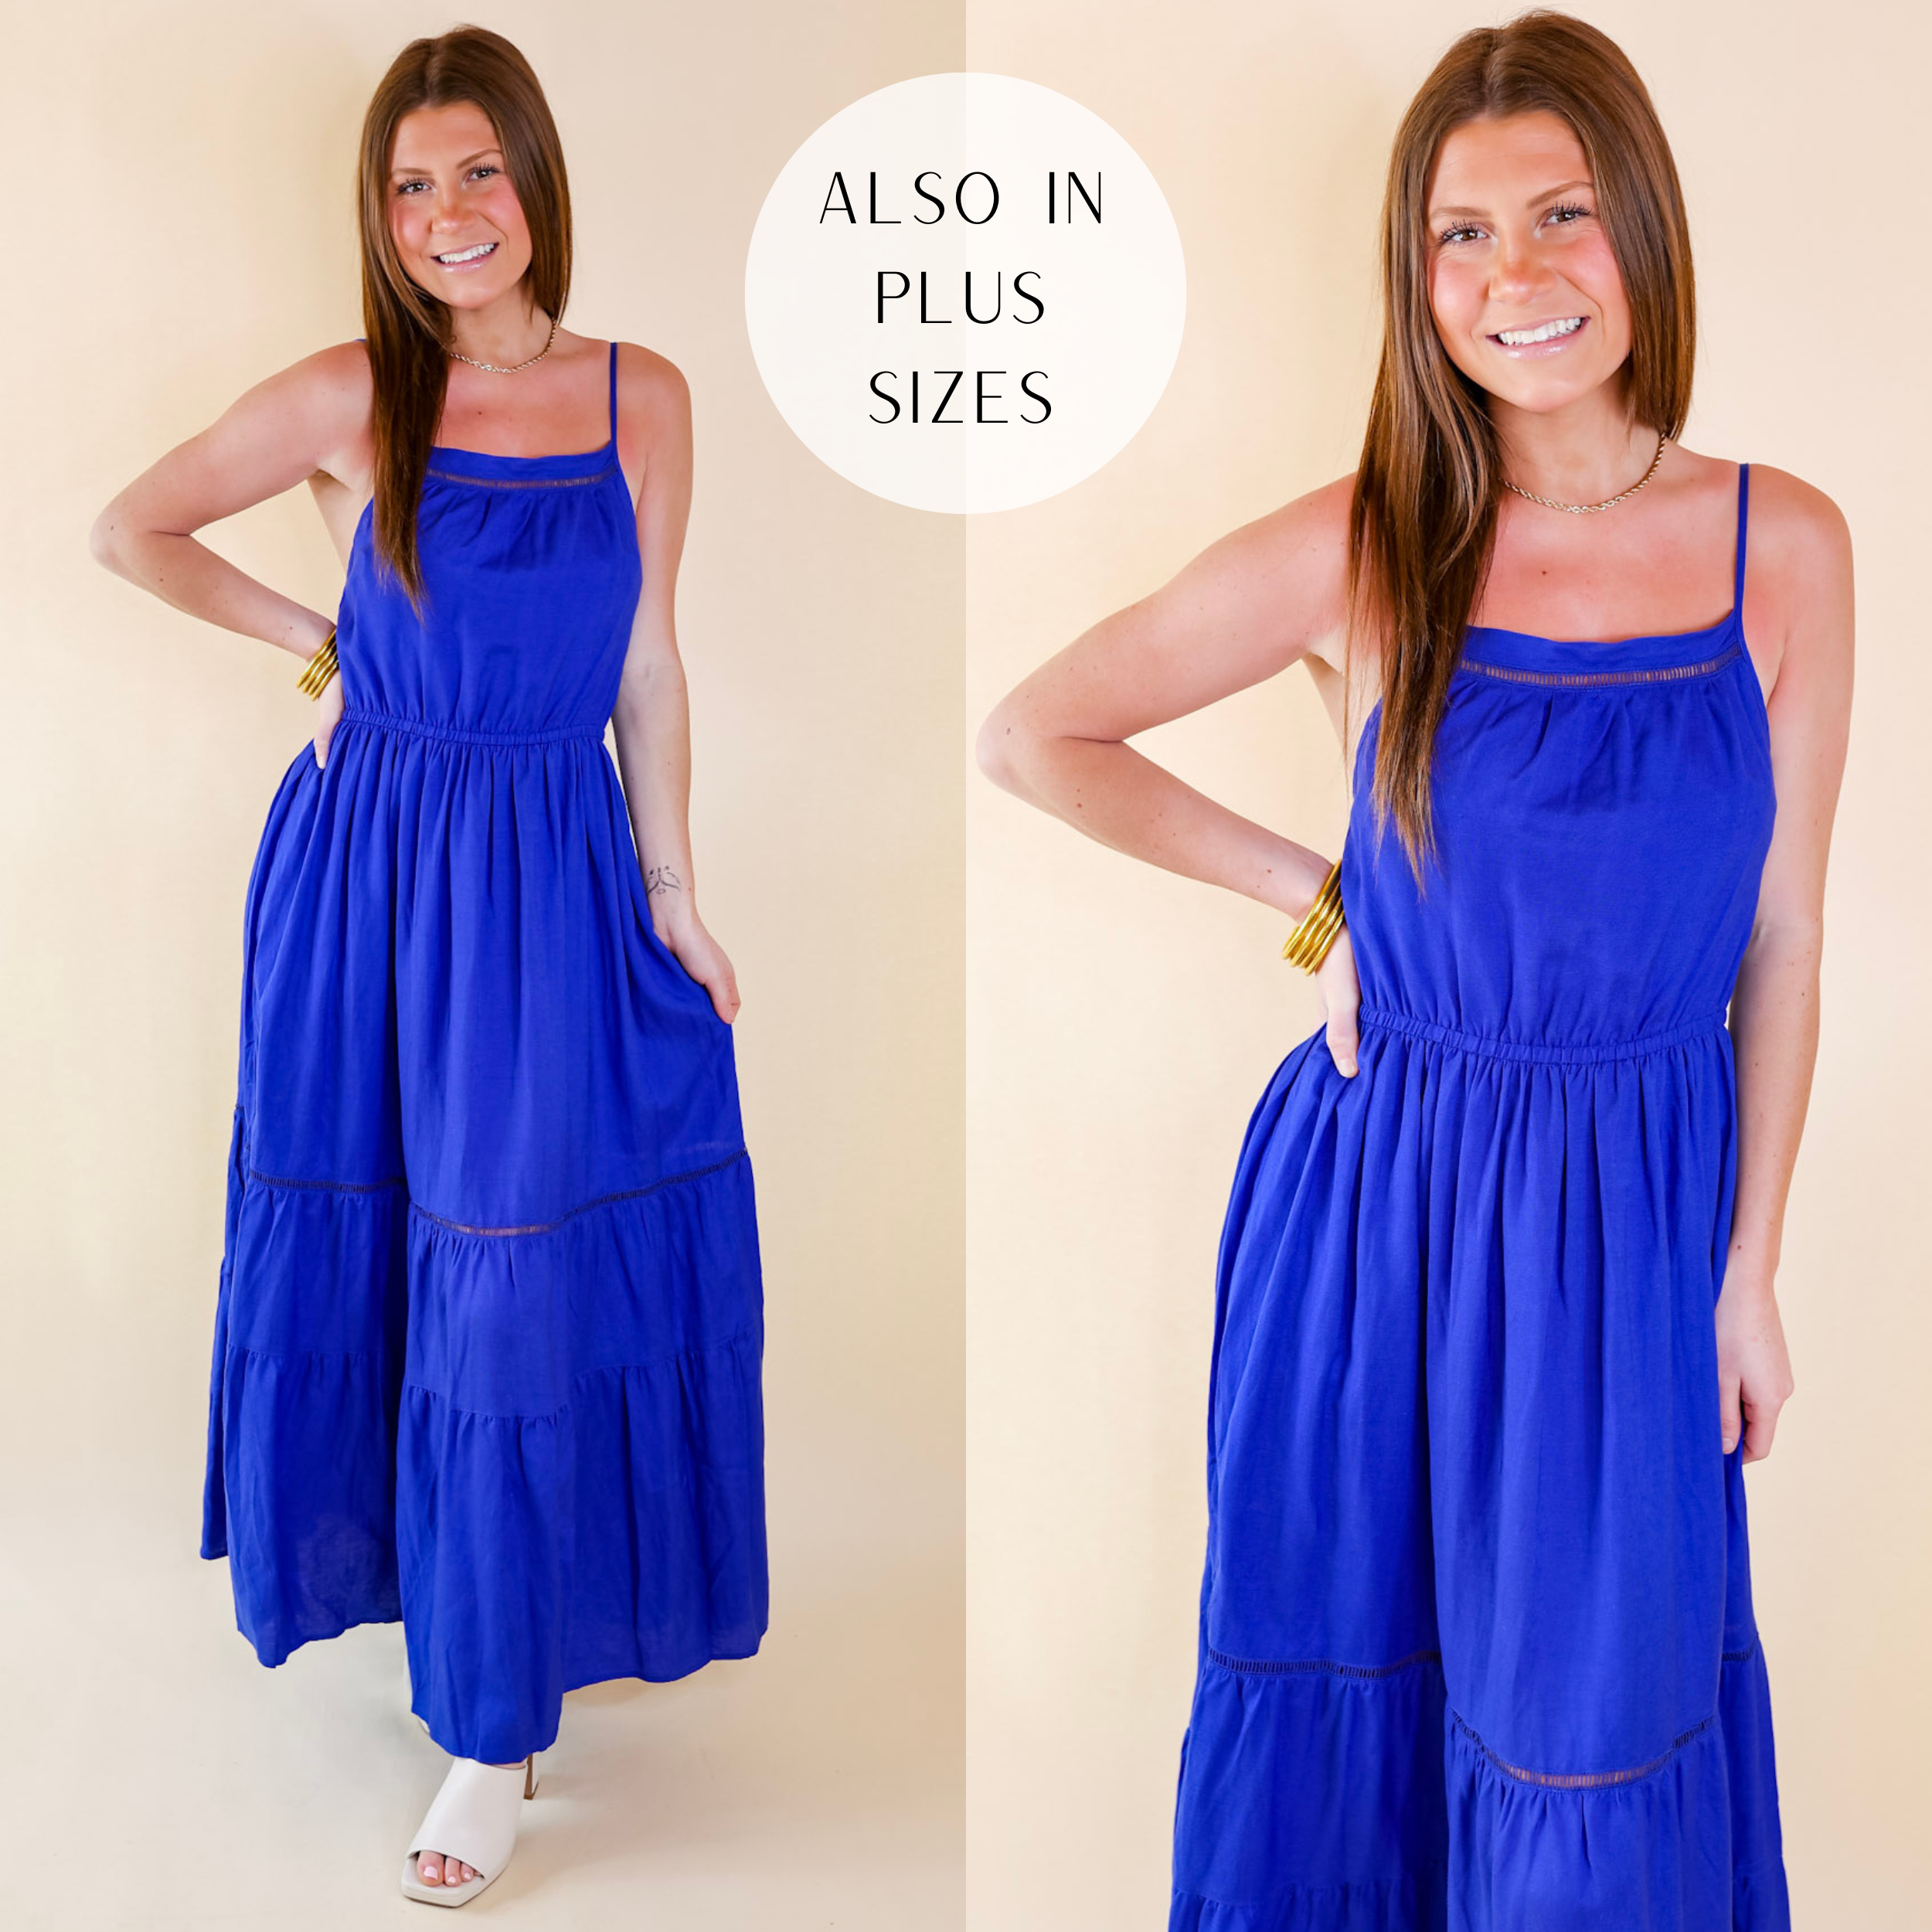 Model is wearing a royal blue maxi dress with spaghetti straps, an elastic natural waist, and a tiered skirt. Model has it paired with white heels and gold jewelry.